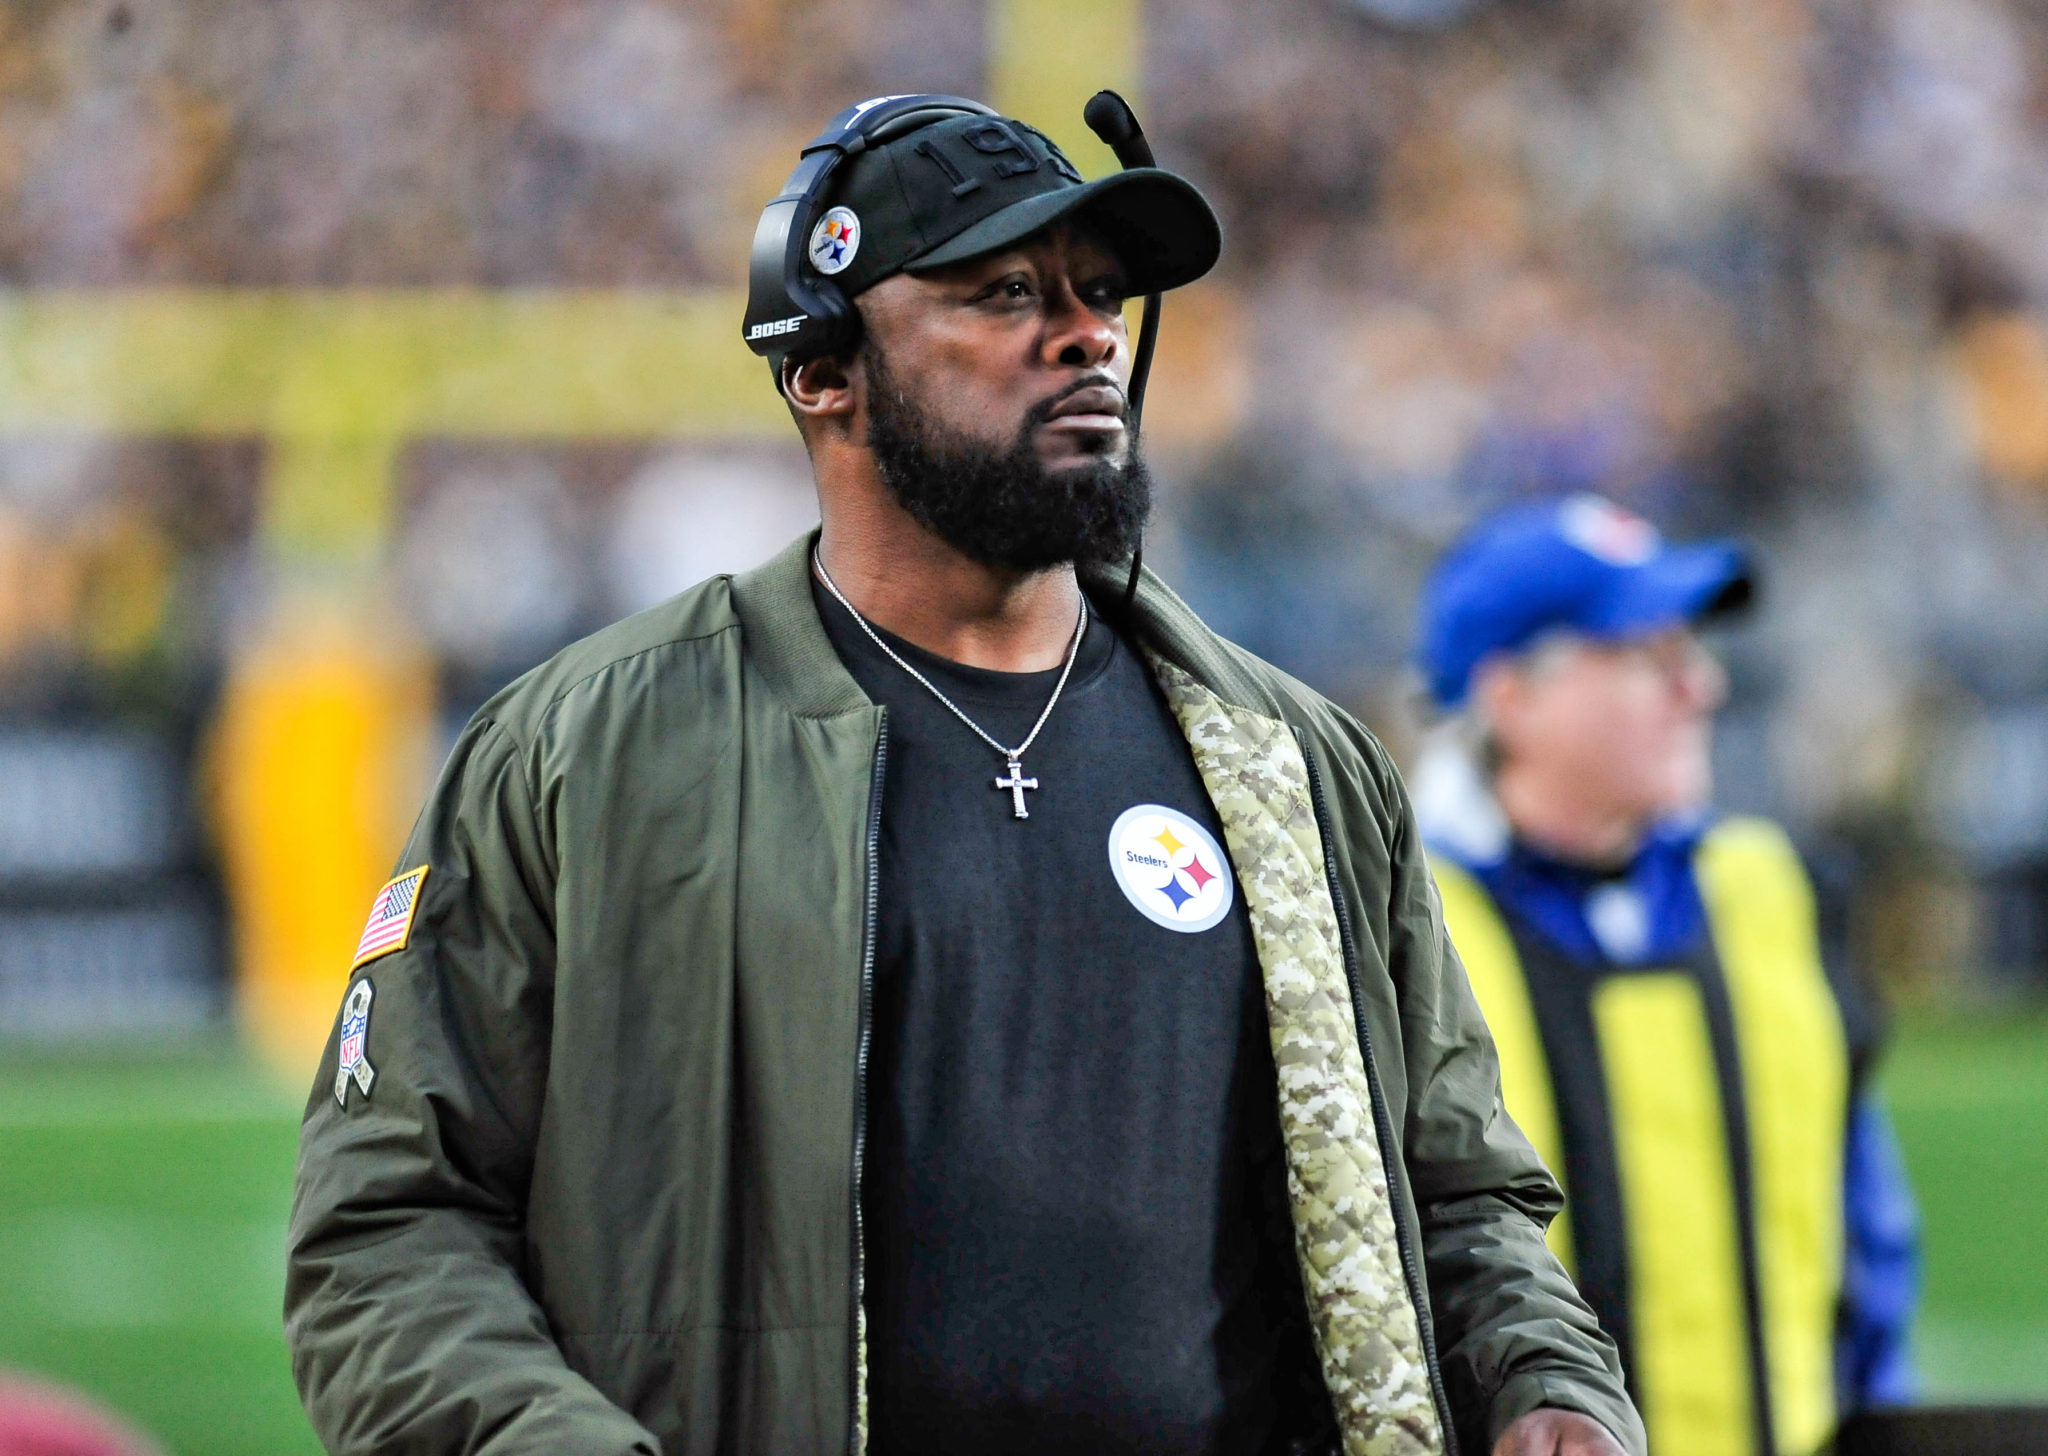 Happy Birthday to coach Mike Tomlin! Hope you had a great day. 